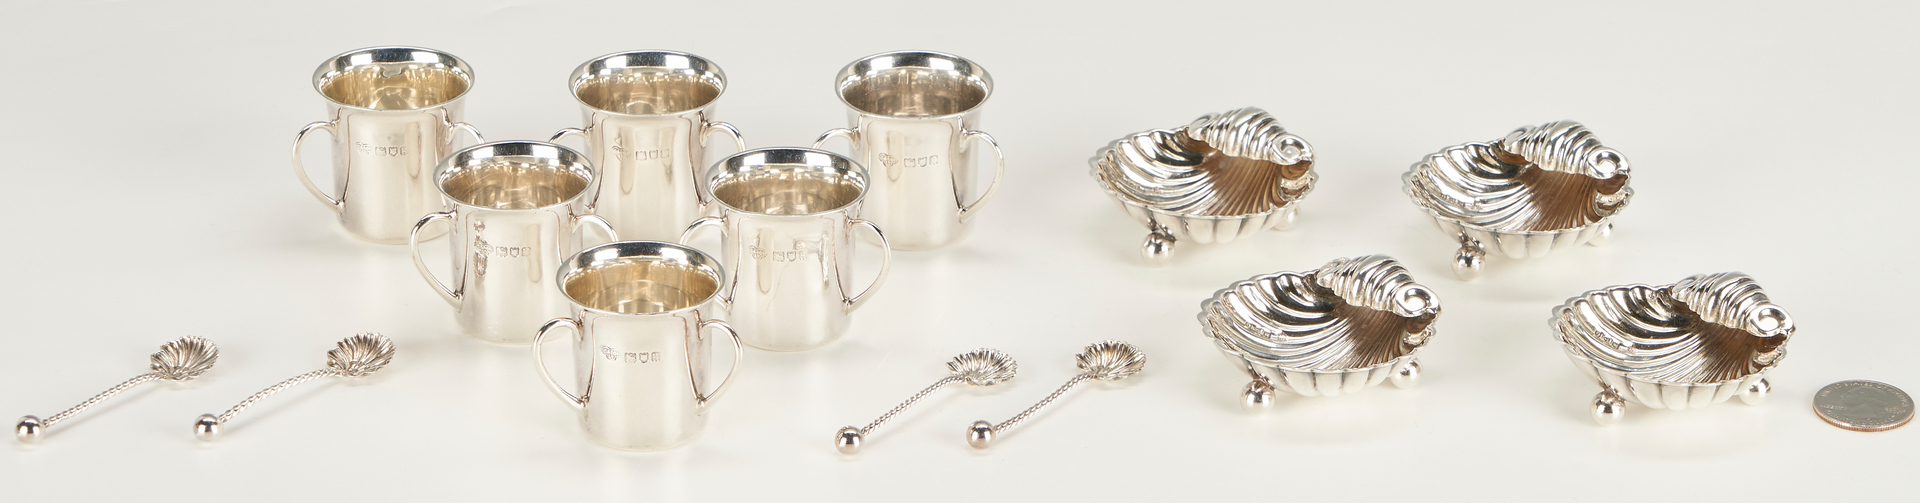 Lot 1231: 18 pcs. English & American Sterling Silver, incl. Miniature Loving Cups w/ Cases